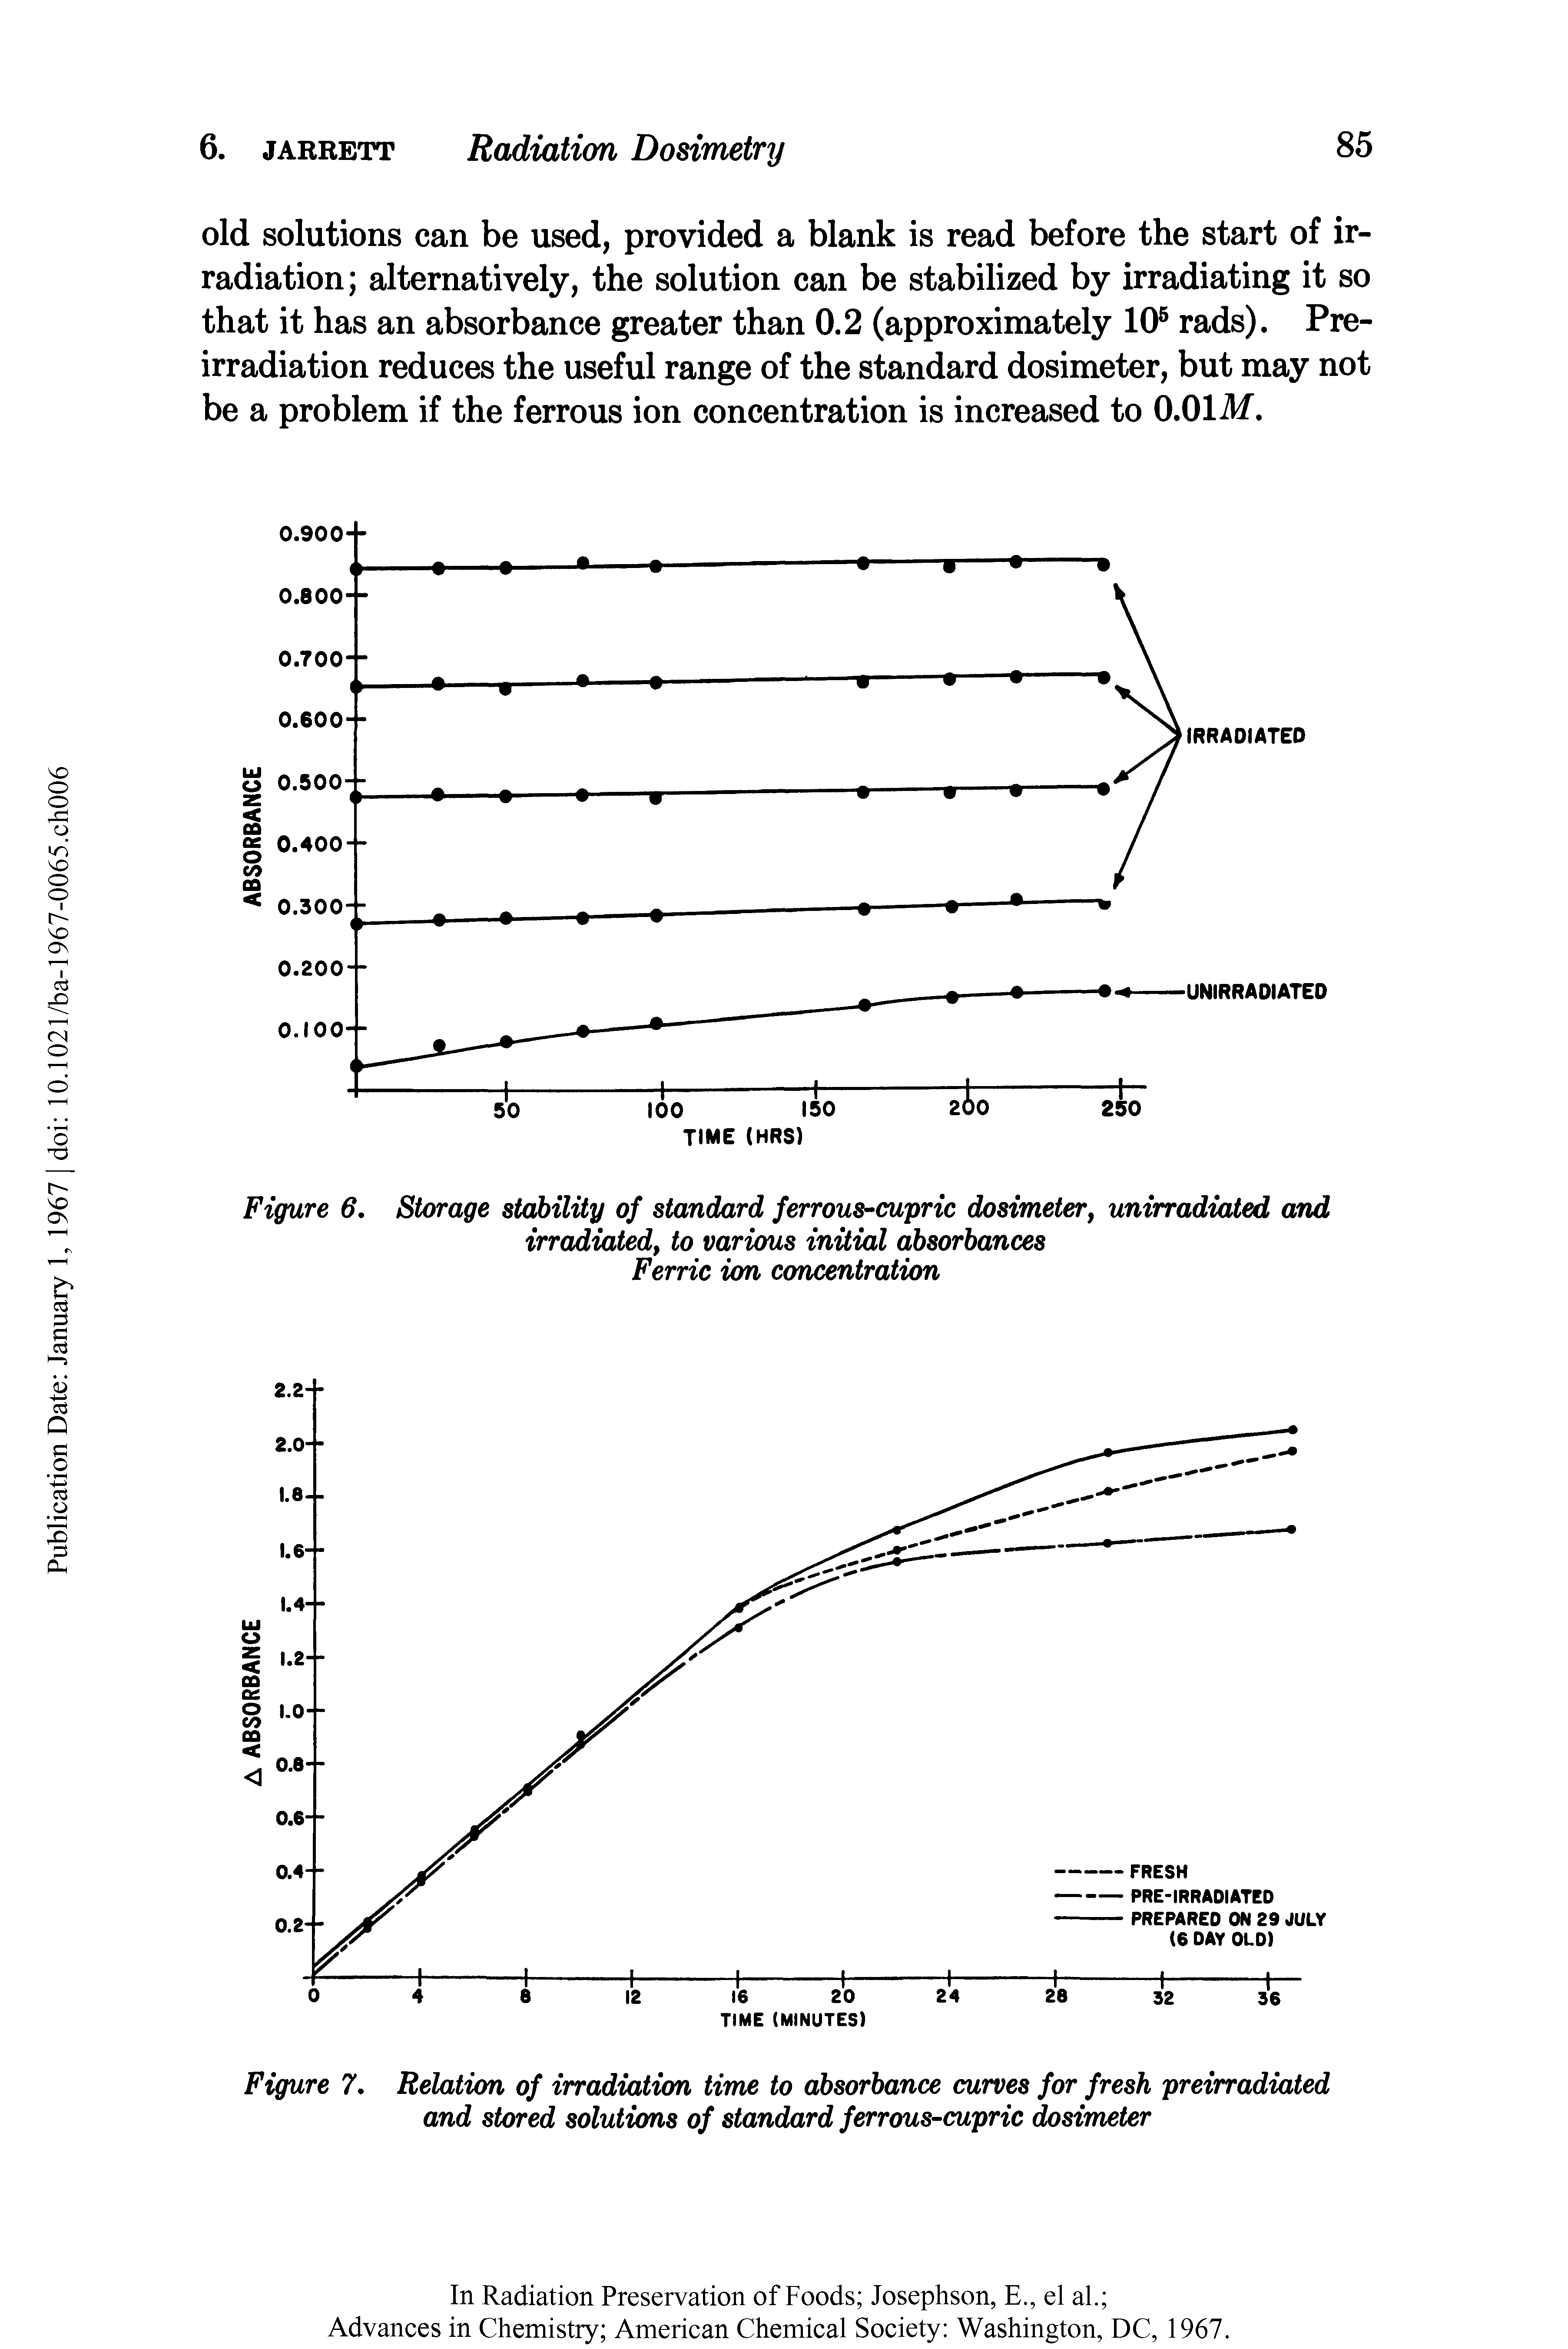 Figure 7. Relation of irradiation time to absorbance curves for fresh preirradiated and stored solutions of standard ferrous-cupric dosimeter...